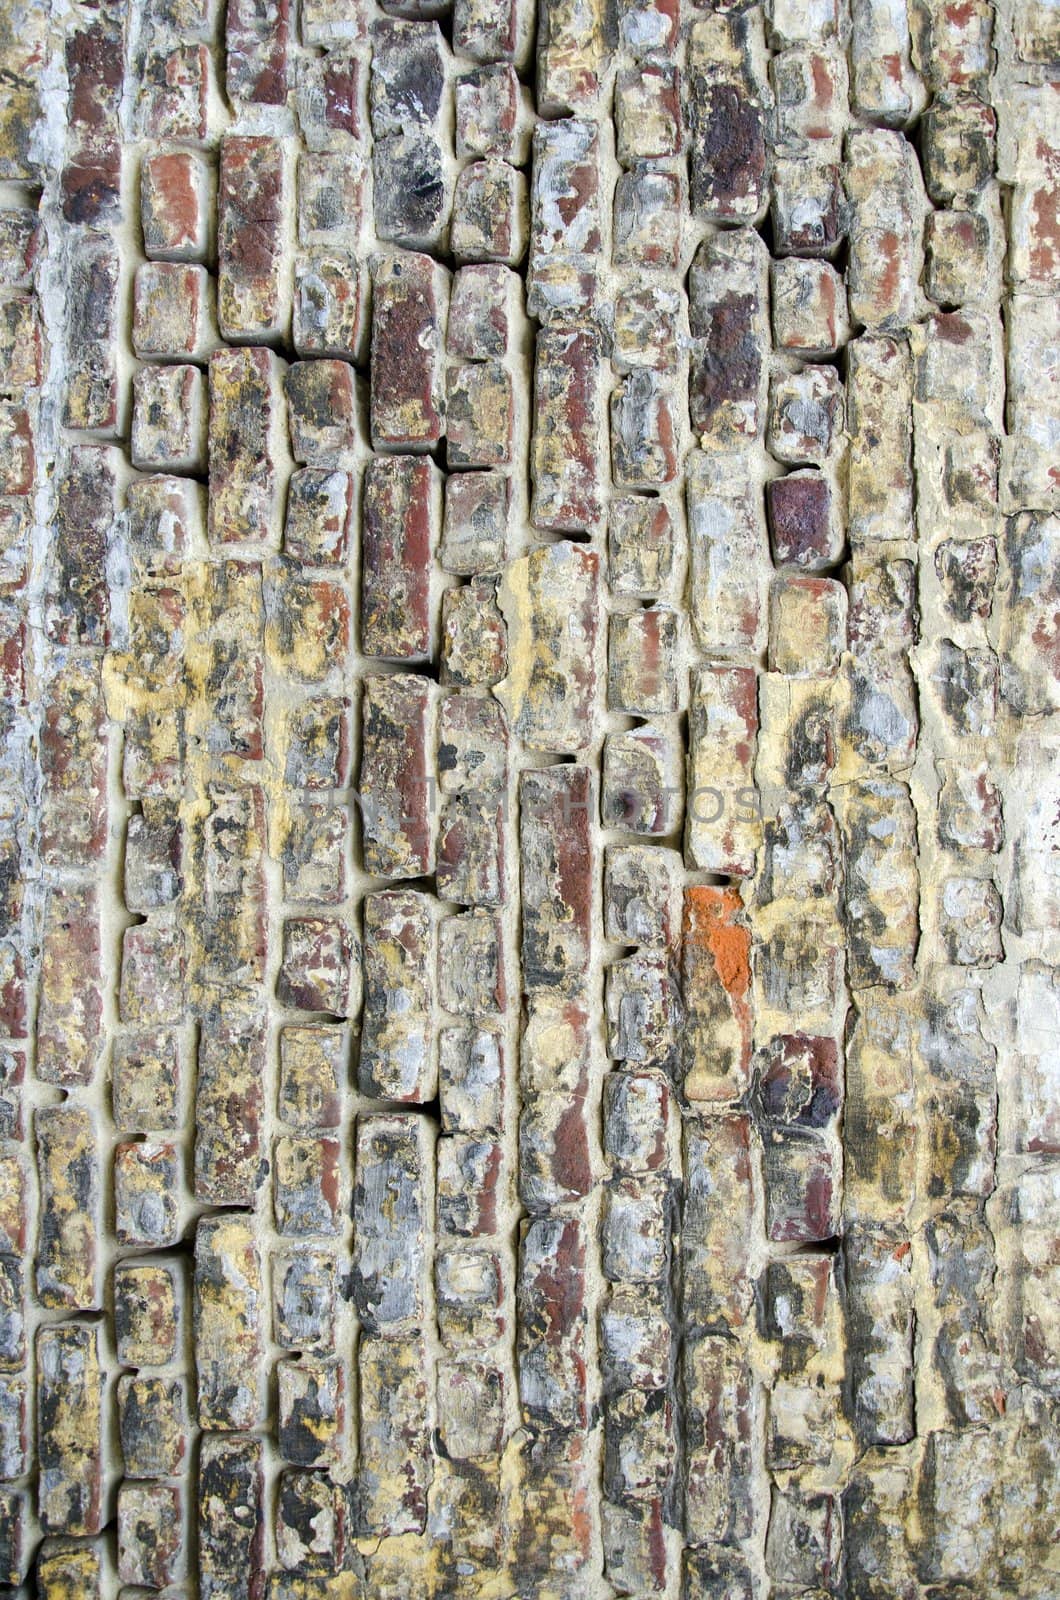 Old brick wall background architecture details and textures